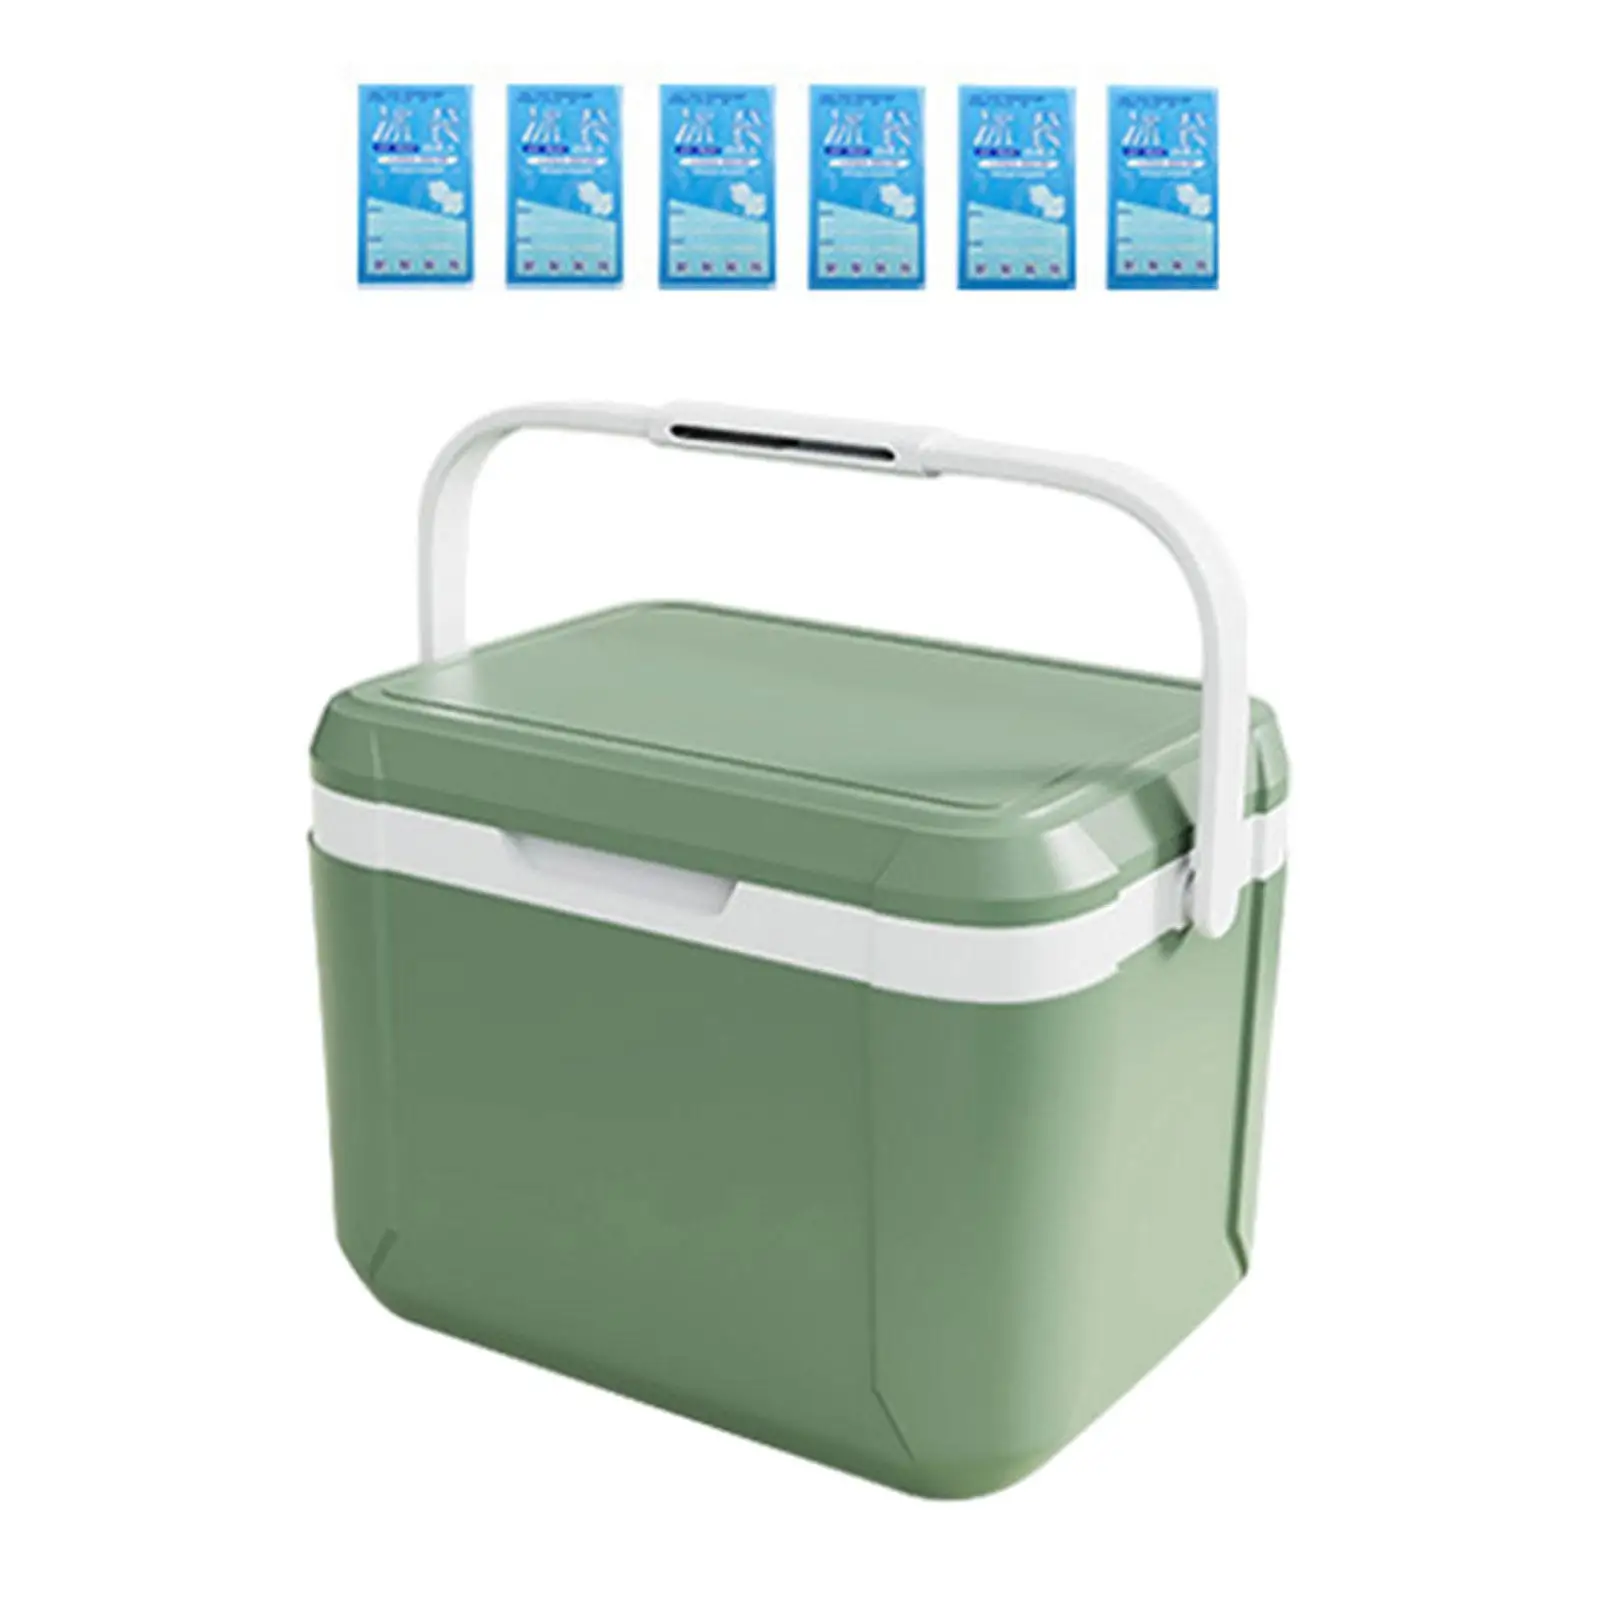 Insulated Cooler Box Ice Retention Cooler Food Delivery with Handle Hard Cooler Car Refrigerator for Shipping Food BBQ